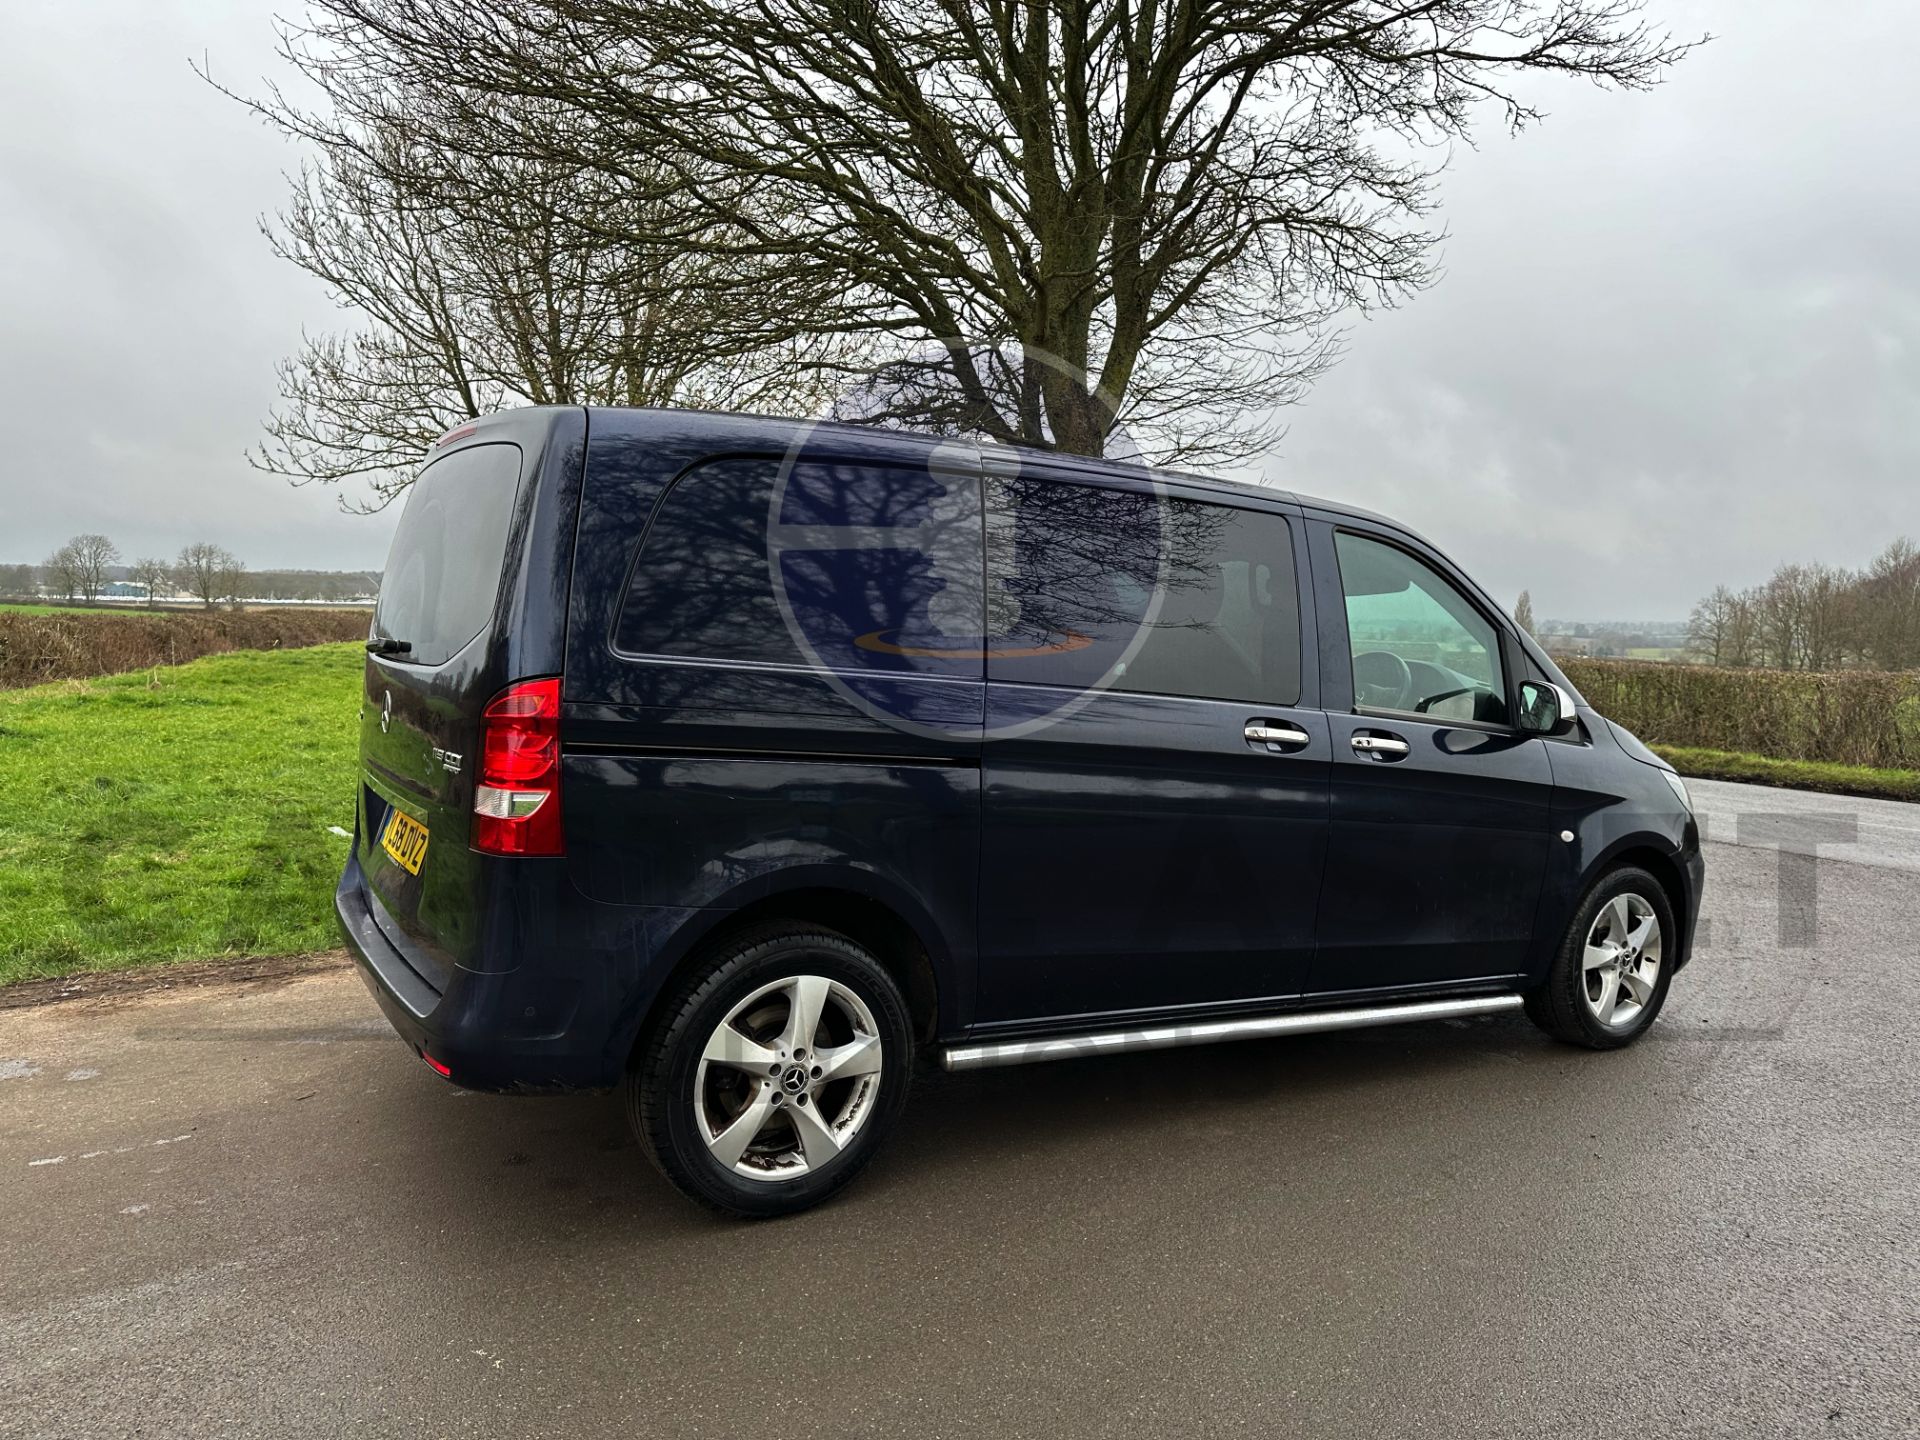 (ON SALE) MERCEDES-BENZ VITO 119 CDI AUTO *SWB - 5 SEATER DUALINER* (2019 - EURO 6) *SPORT EDITION* - Image 13 of 44